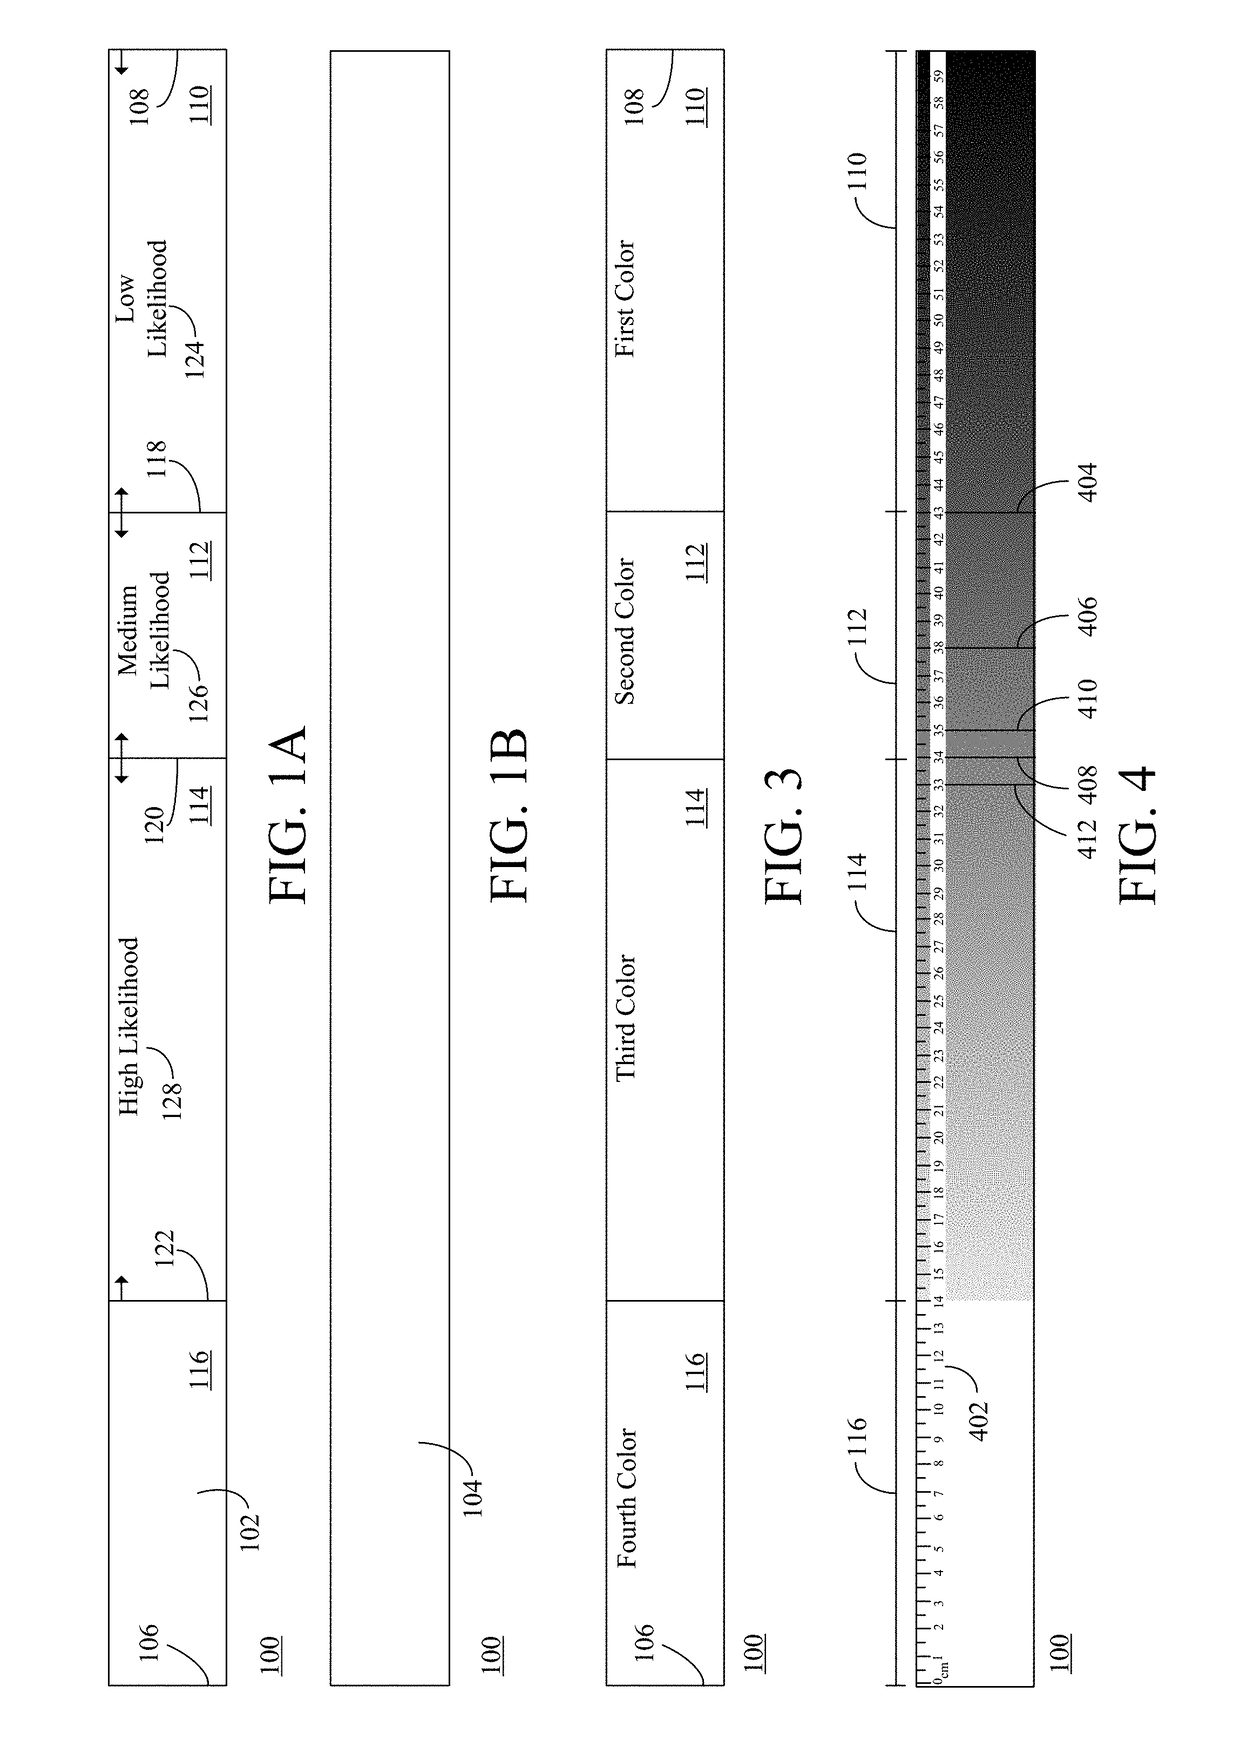 Systems, methods, and apparatuses for peripheral arterial disease detection and mitigation thereof